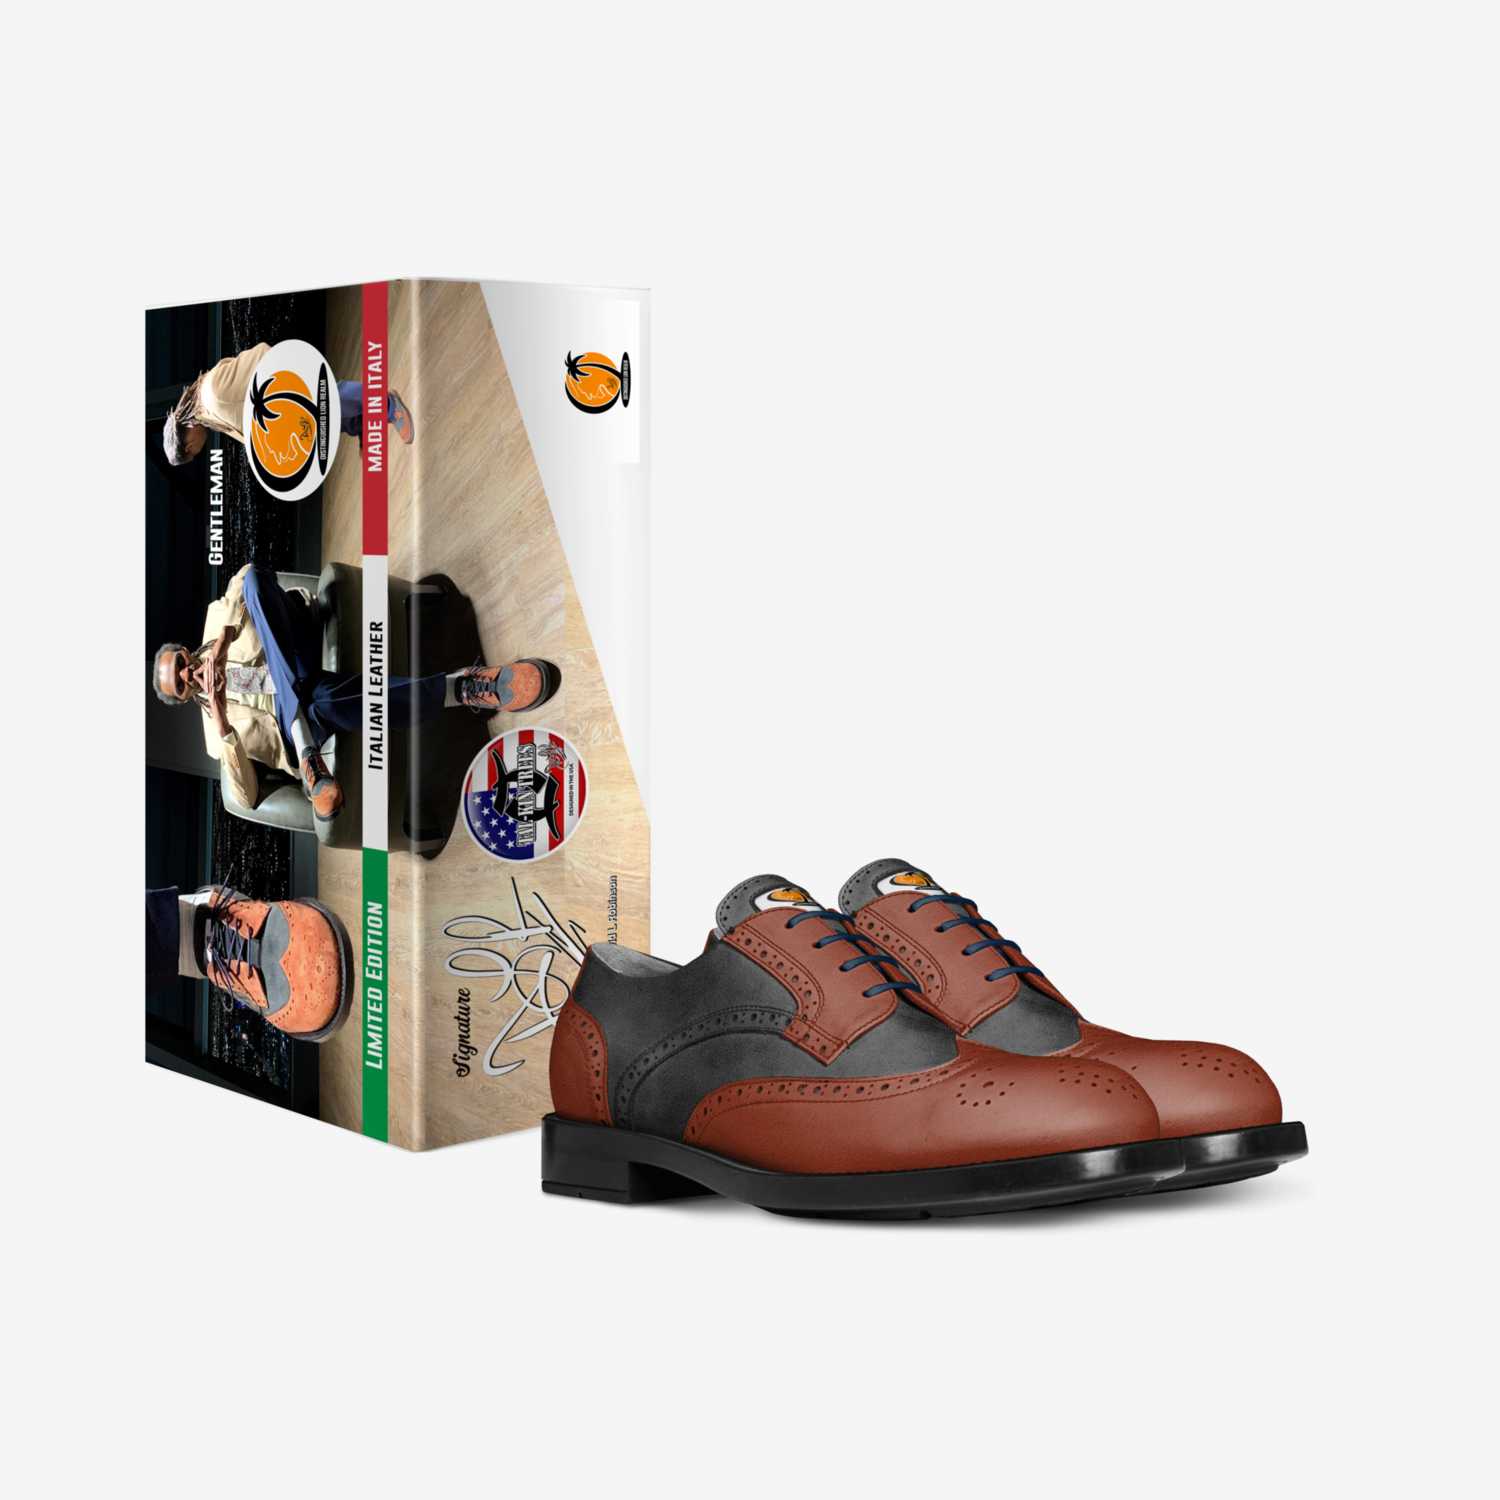 Gentleman custom made in Italy shoes by David Robinson | Box view